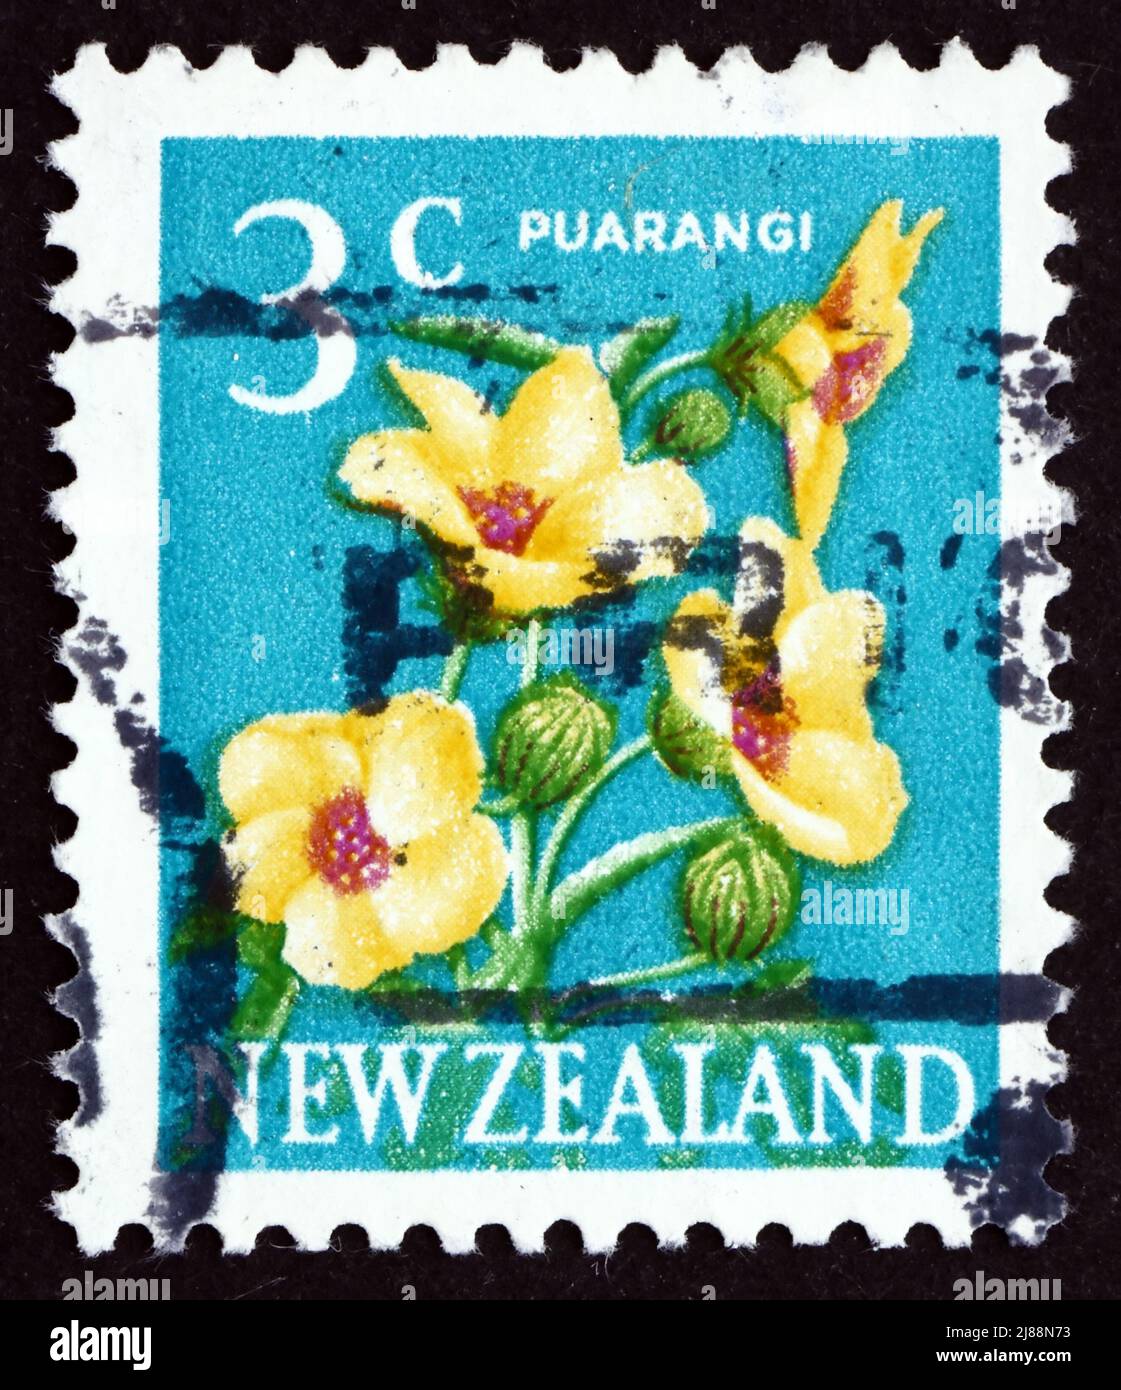 NEW ZEALAND - CIRCA 1967: a stamp printed in the New Zealand shows Puarangi, New Zealand Hibiscus, Hibiscus Trionum, Flowering Plant, circa 1967 Stock Photo